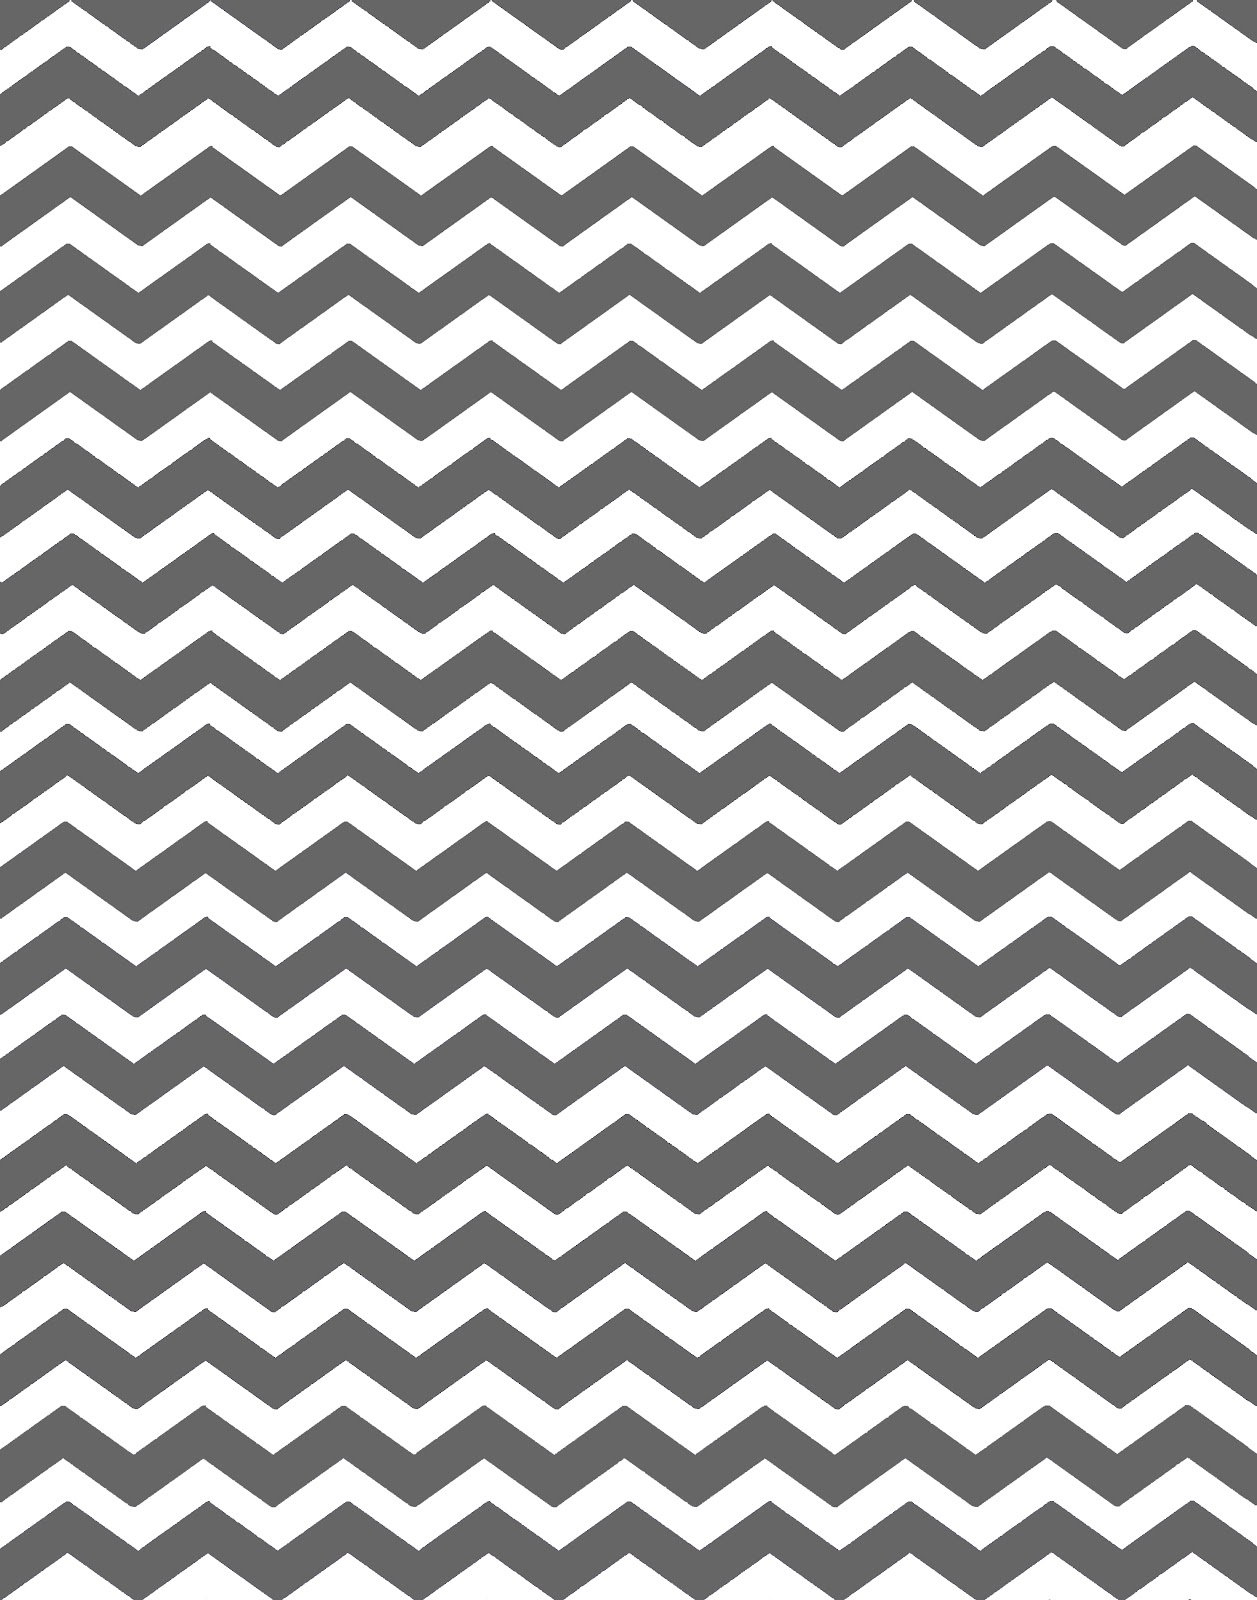 Chevron Patterned Background Pink And Grey